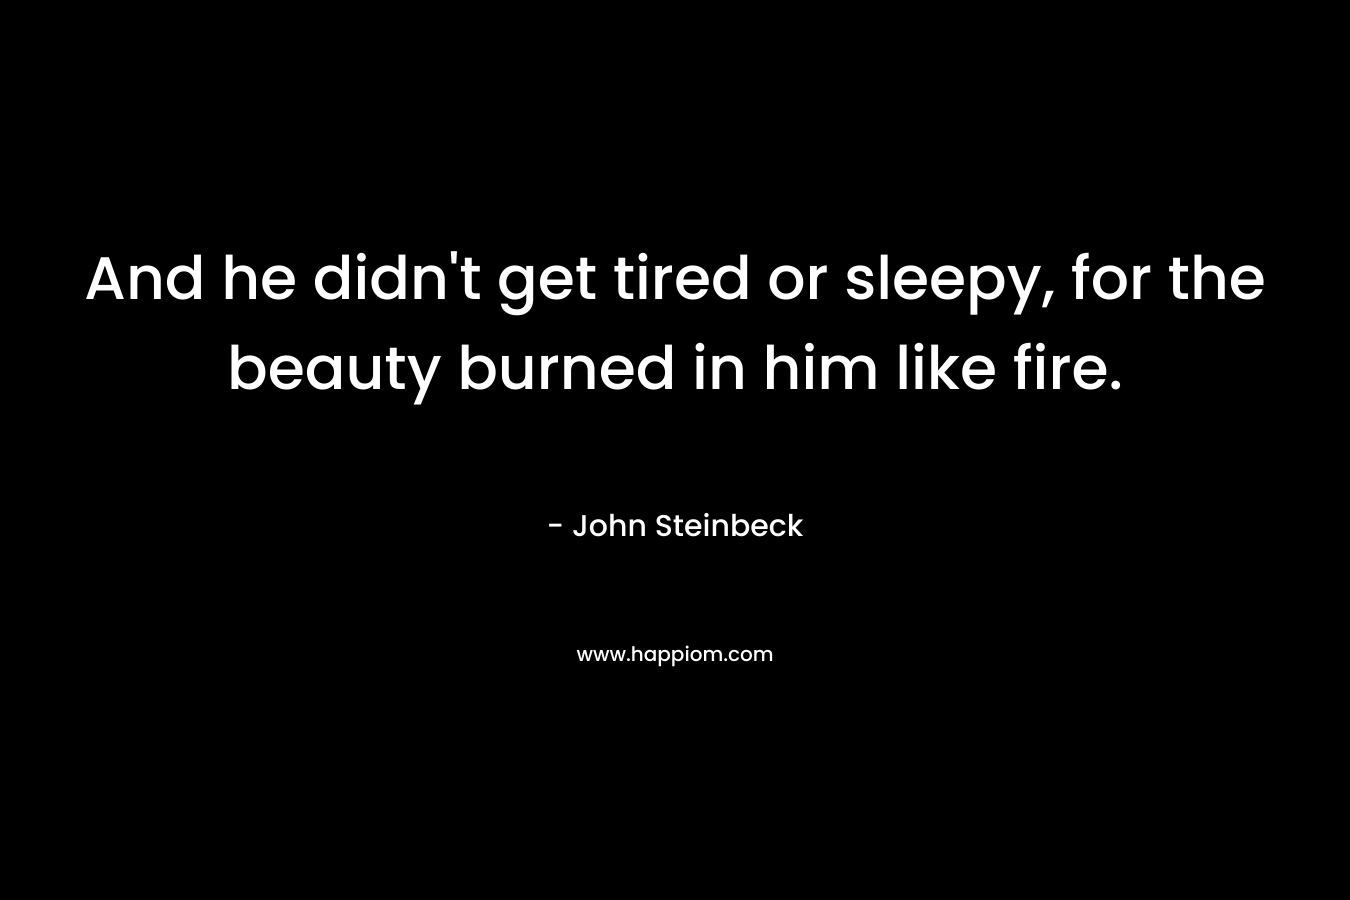 And he didn’t get tired or sleepy, for the beauty burned in him like fire. – John Steinbeck